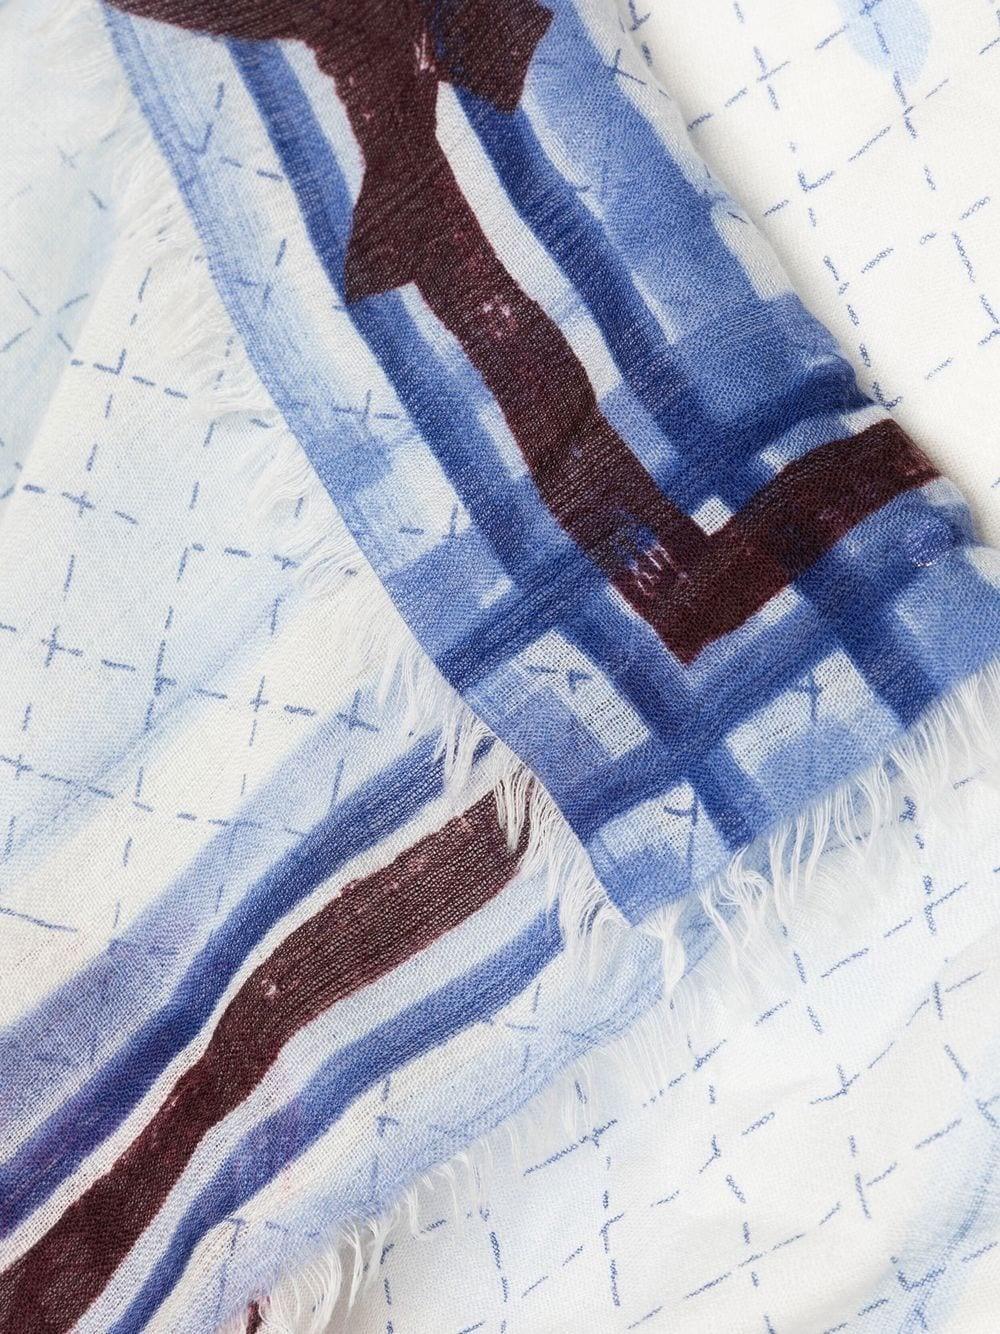 An everlasting Chanel symbol, the camelia flower and motif was inspired by Coco Chanel's love for Alexandre Dumas’ novel ‘La Dame aux Camélias’. This silk scarf displays the check pattern all over, emblematic of the classic Chanel quilting and